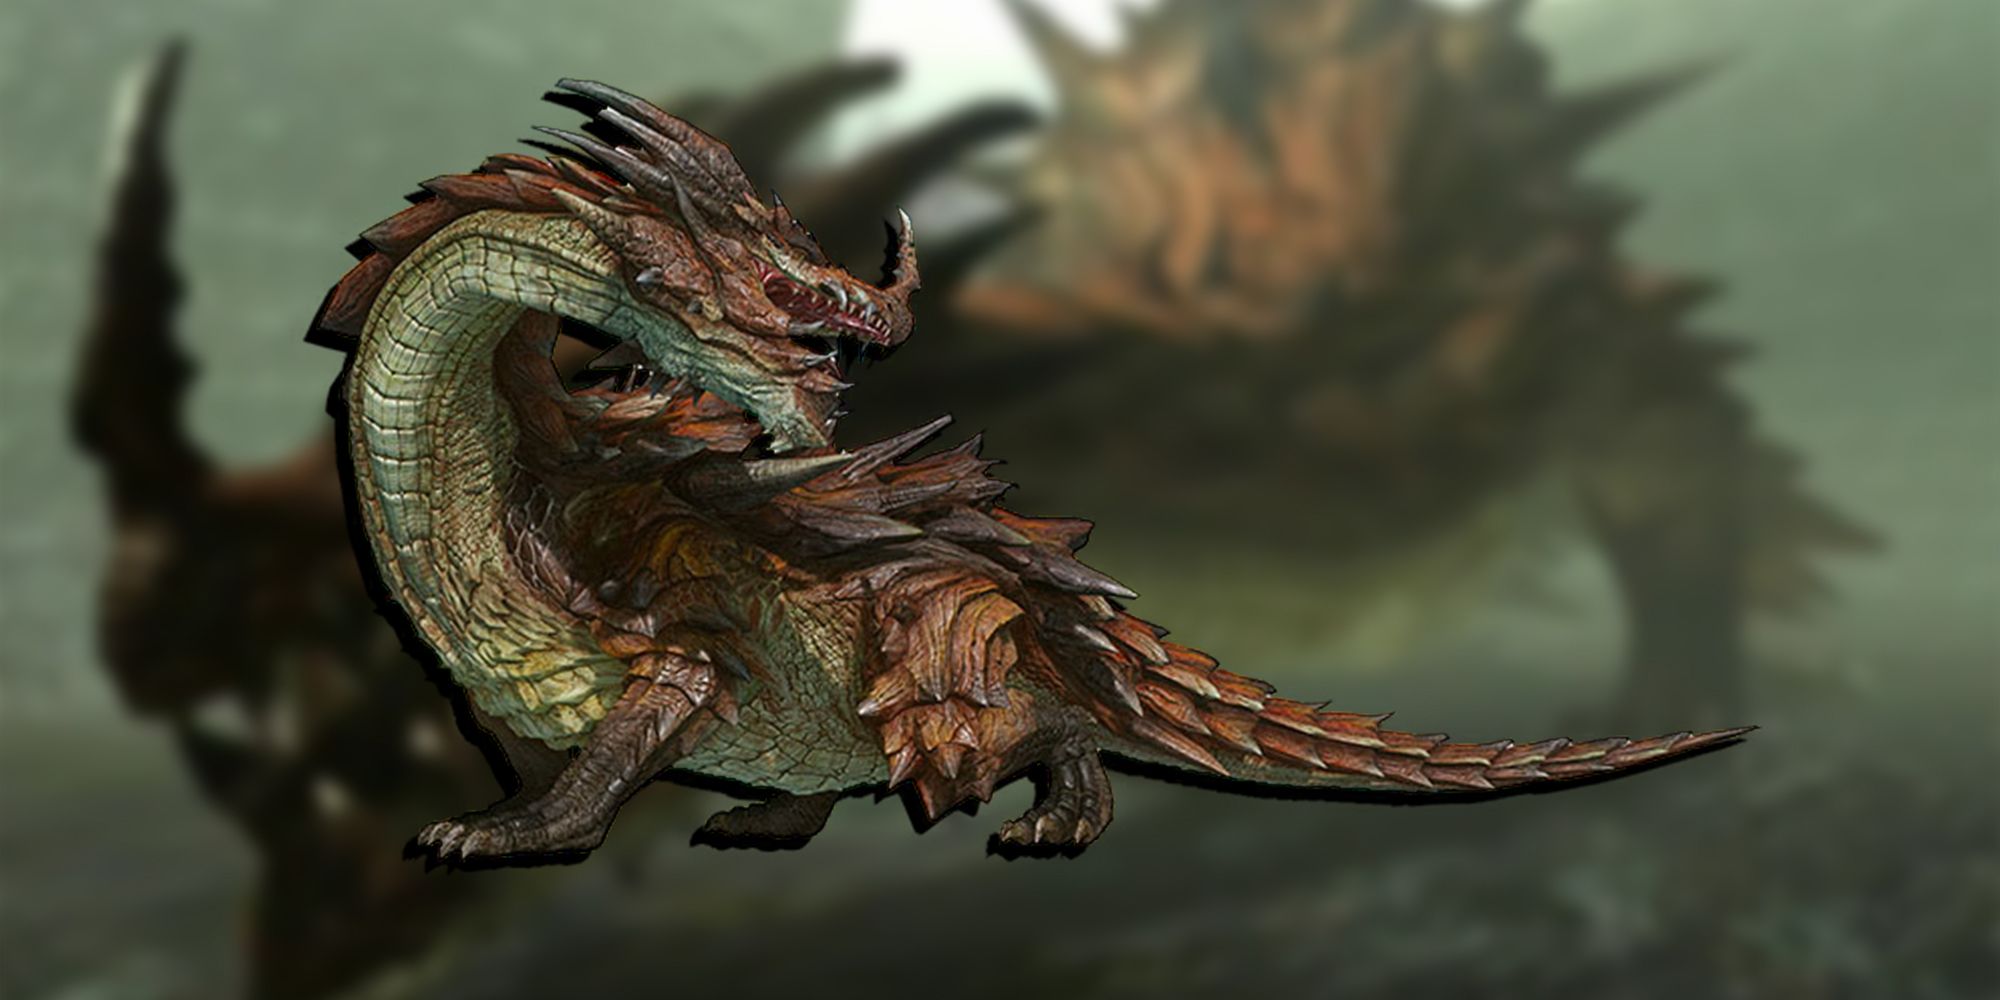 PNG Of Lao Shan Lung Overlaid On Image Of It Slowly Walking Through The Valley In The Original Monster Hunter